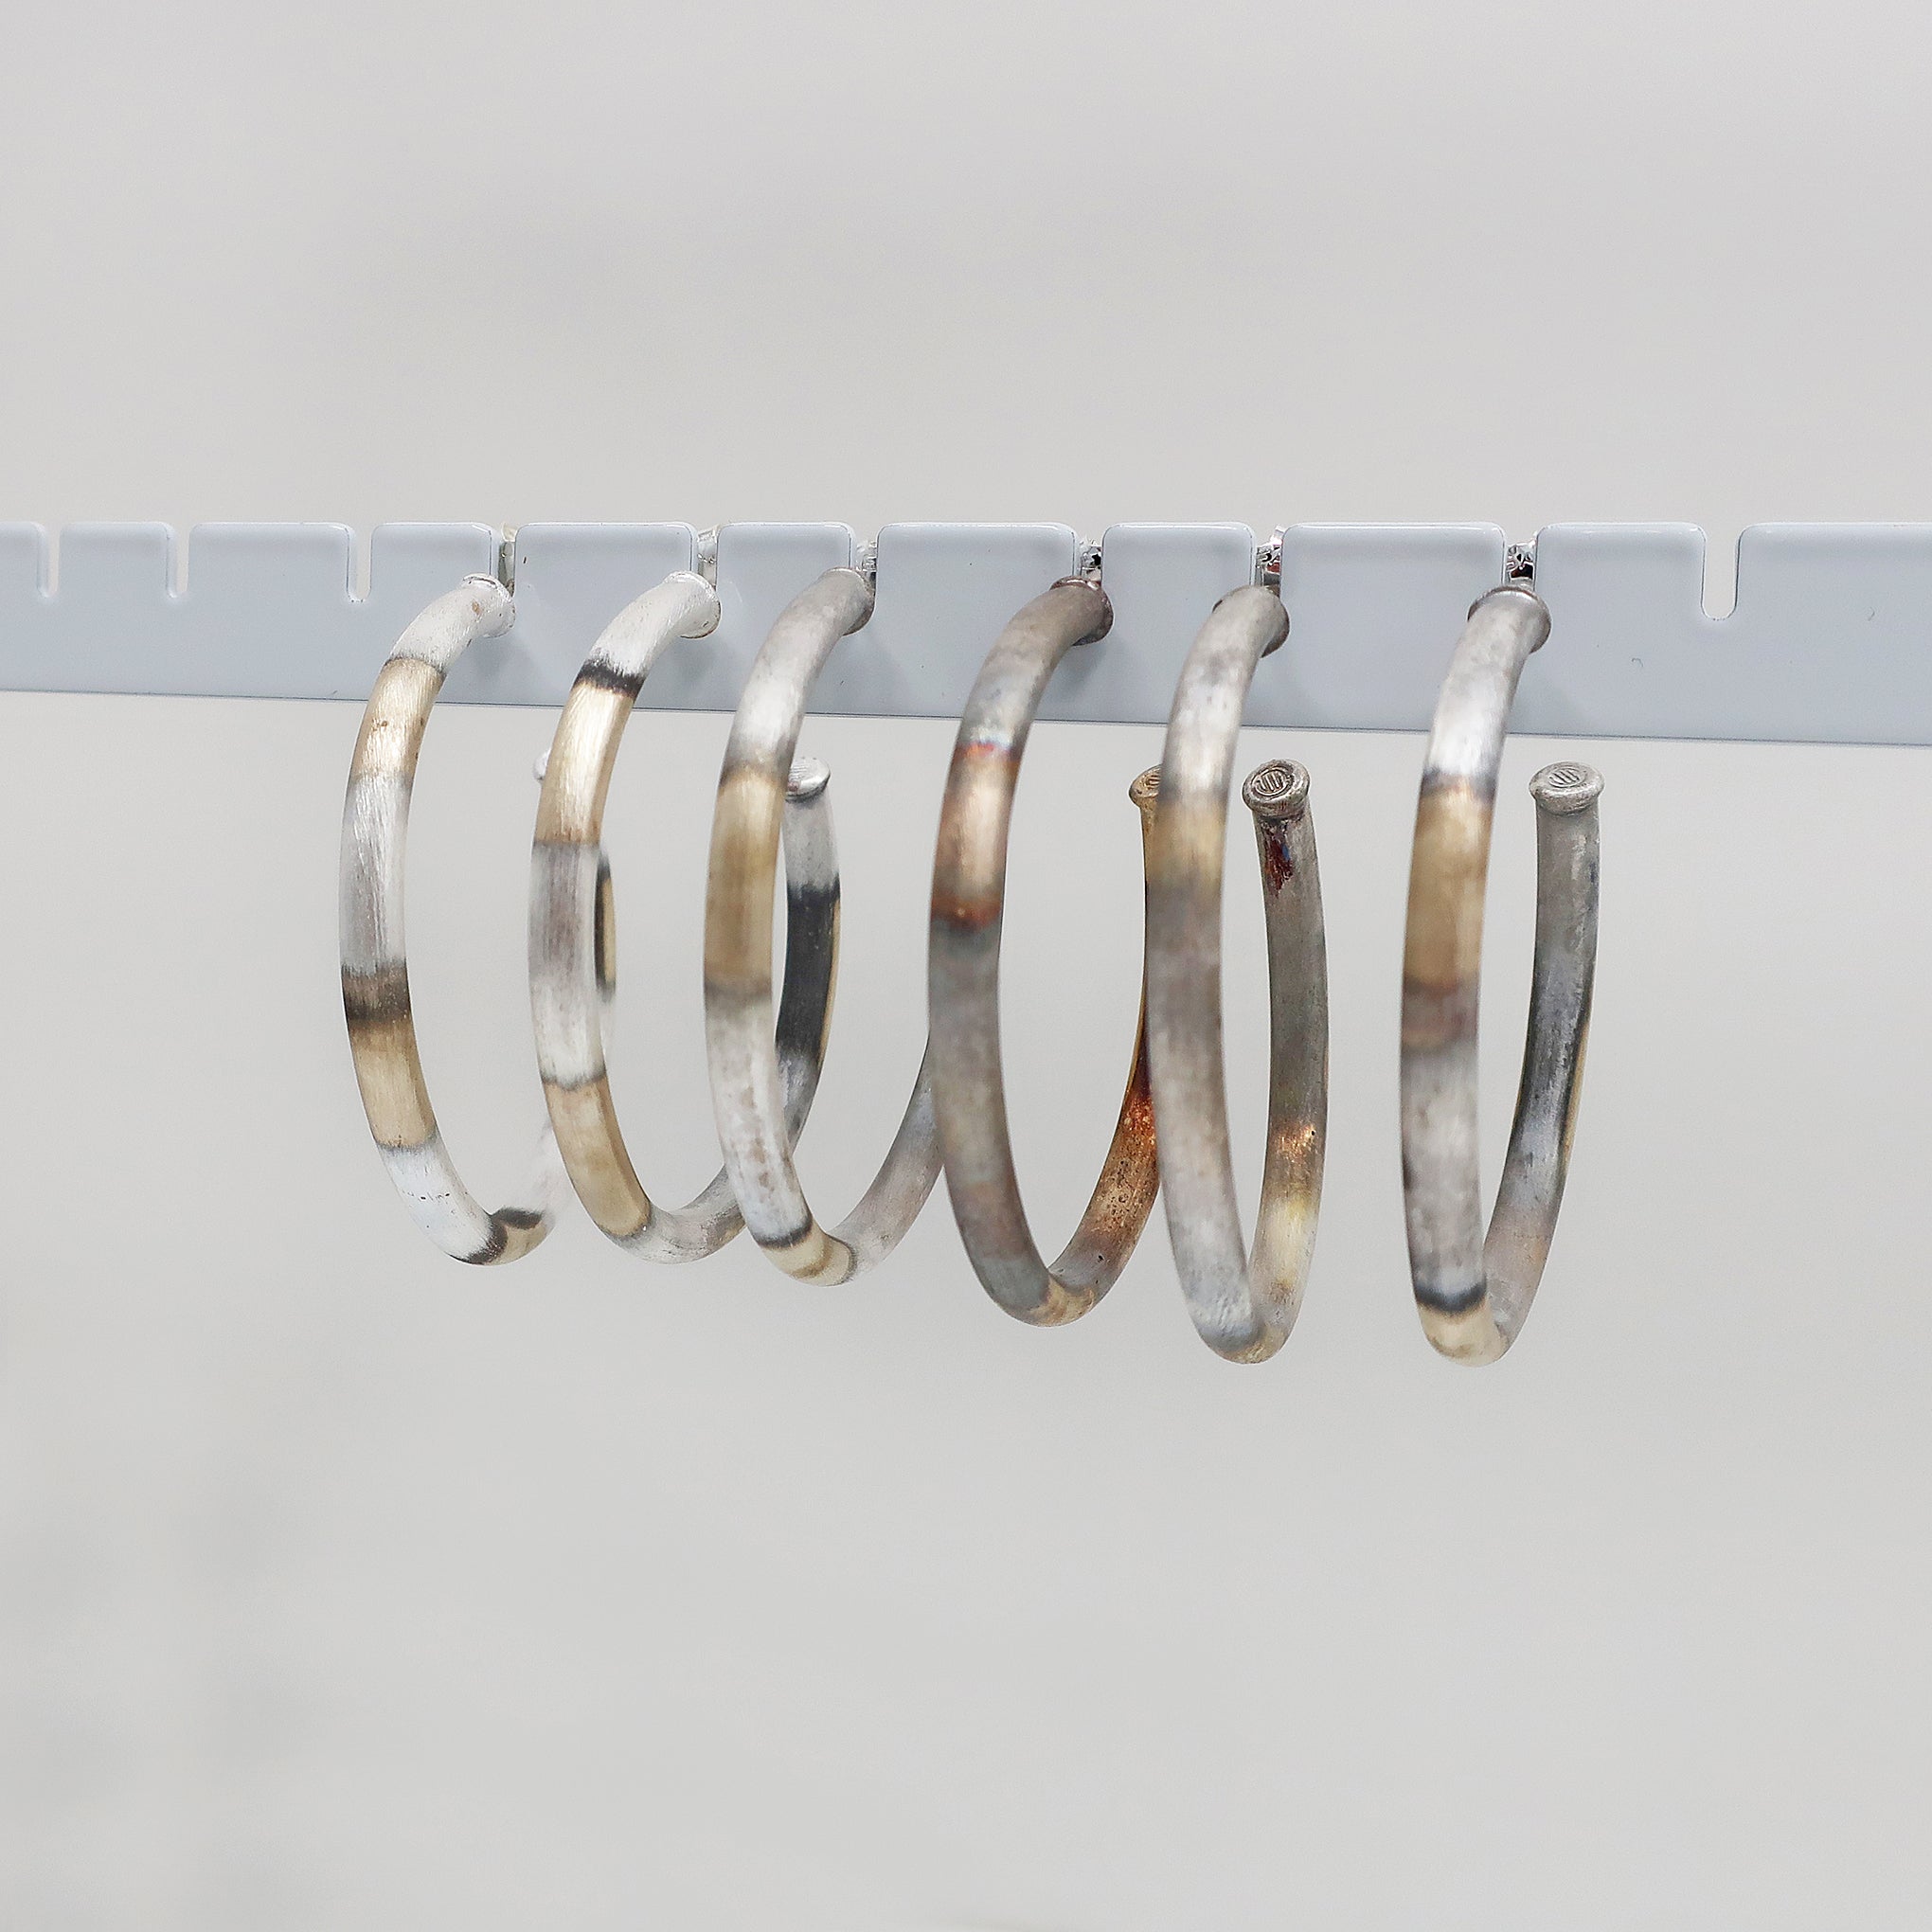 Sheila Fajl Small Everybody's Favorite Tubular Hoop Earrings in Burnished Silver Plated